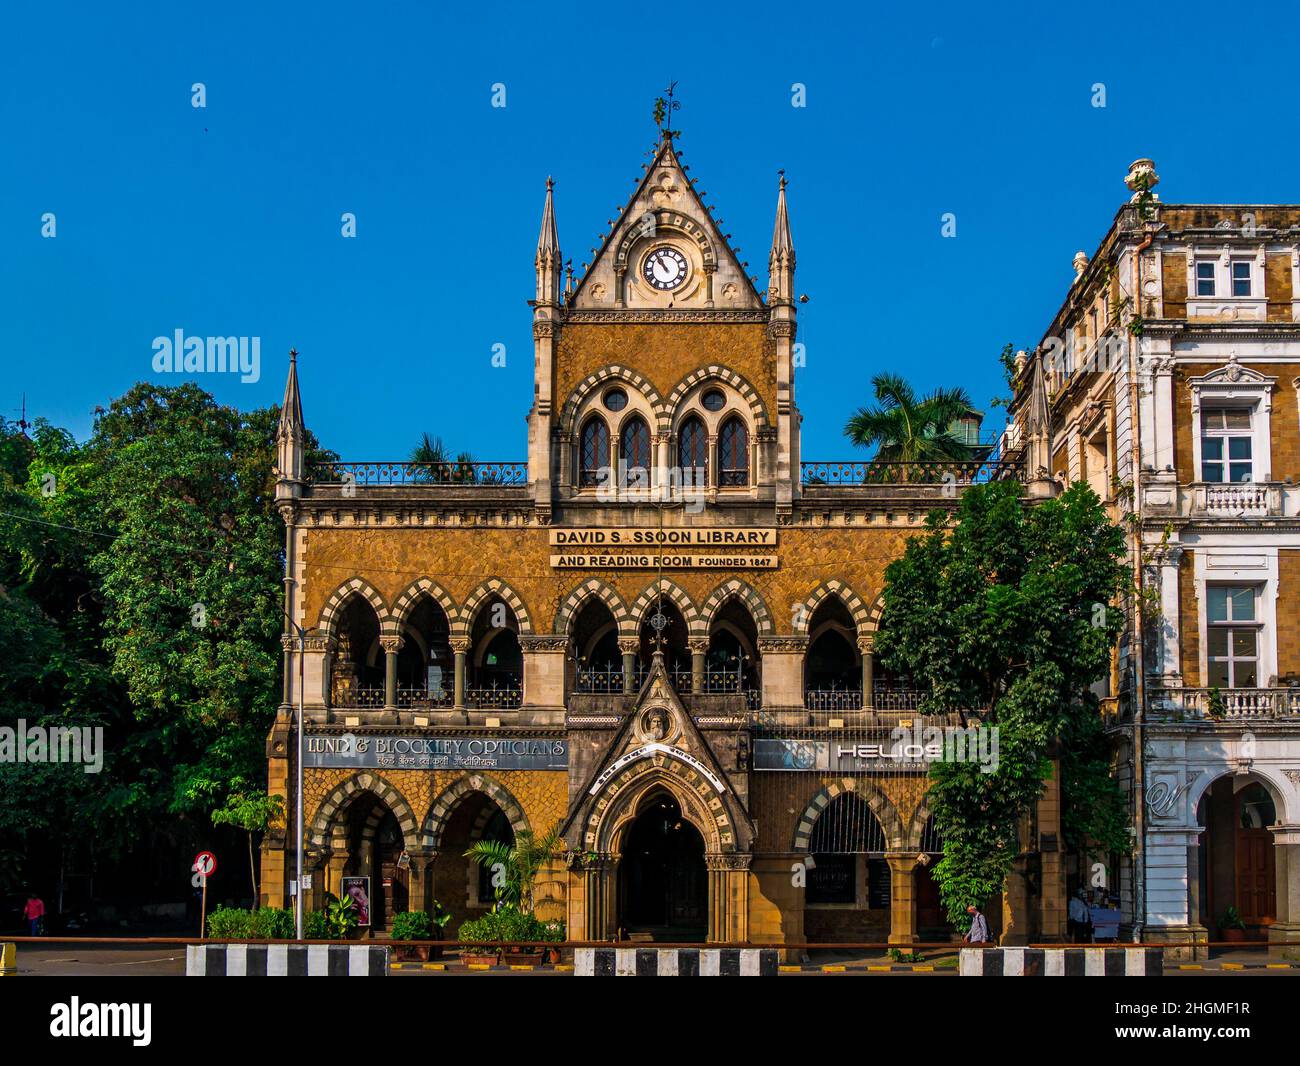 MUMBAI, INDIA - November 26, 2021 : The David Sassoon Library and Reading Room, the first building to come up at the southern end of the Esplanade, ha Stock Photo